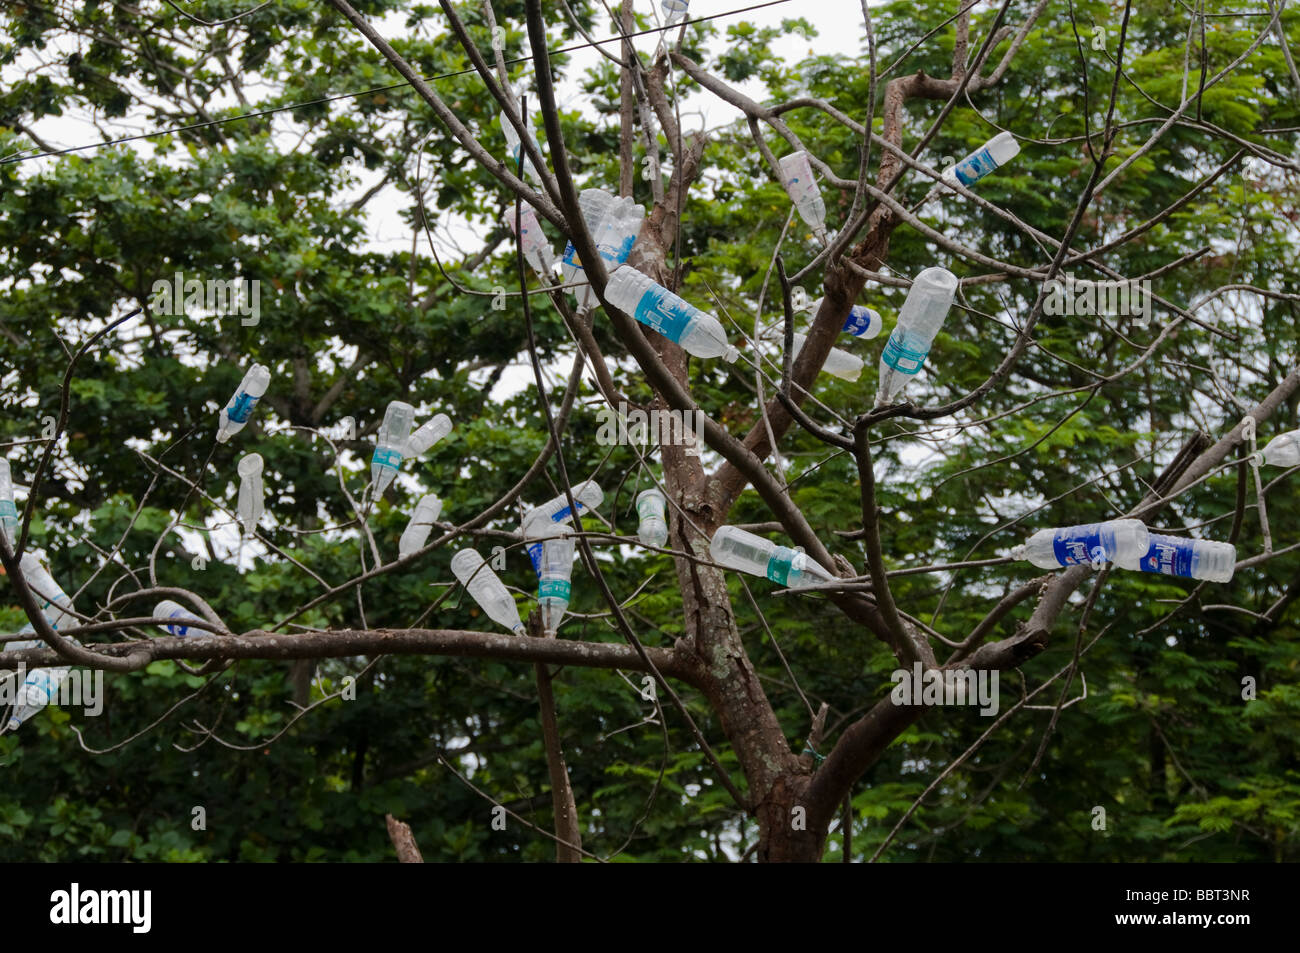 Plastic bottle piled on tree, save earth message displayed in a rural village in India Stock Photo